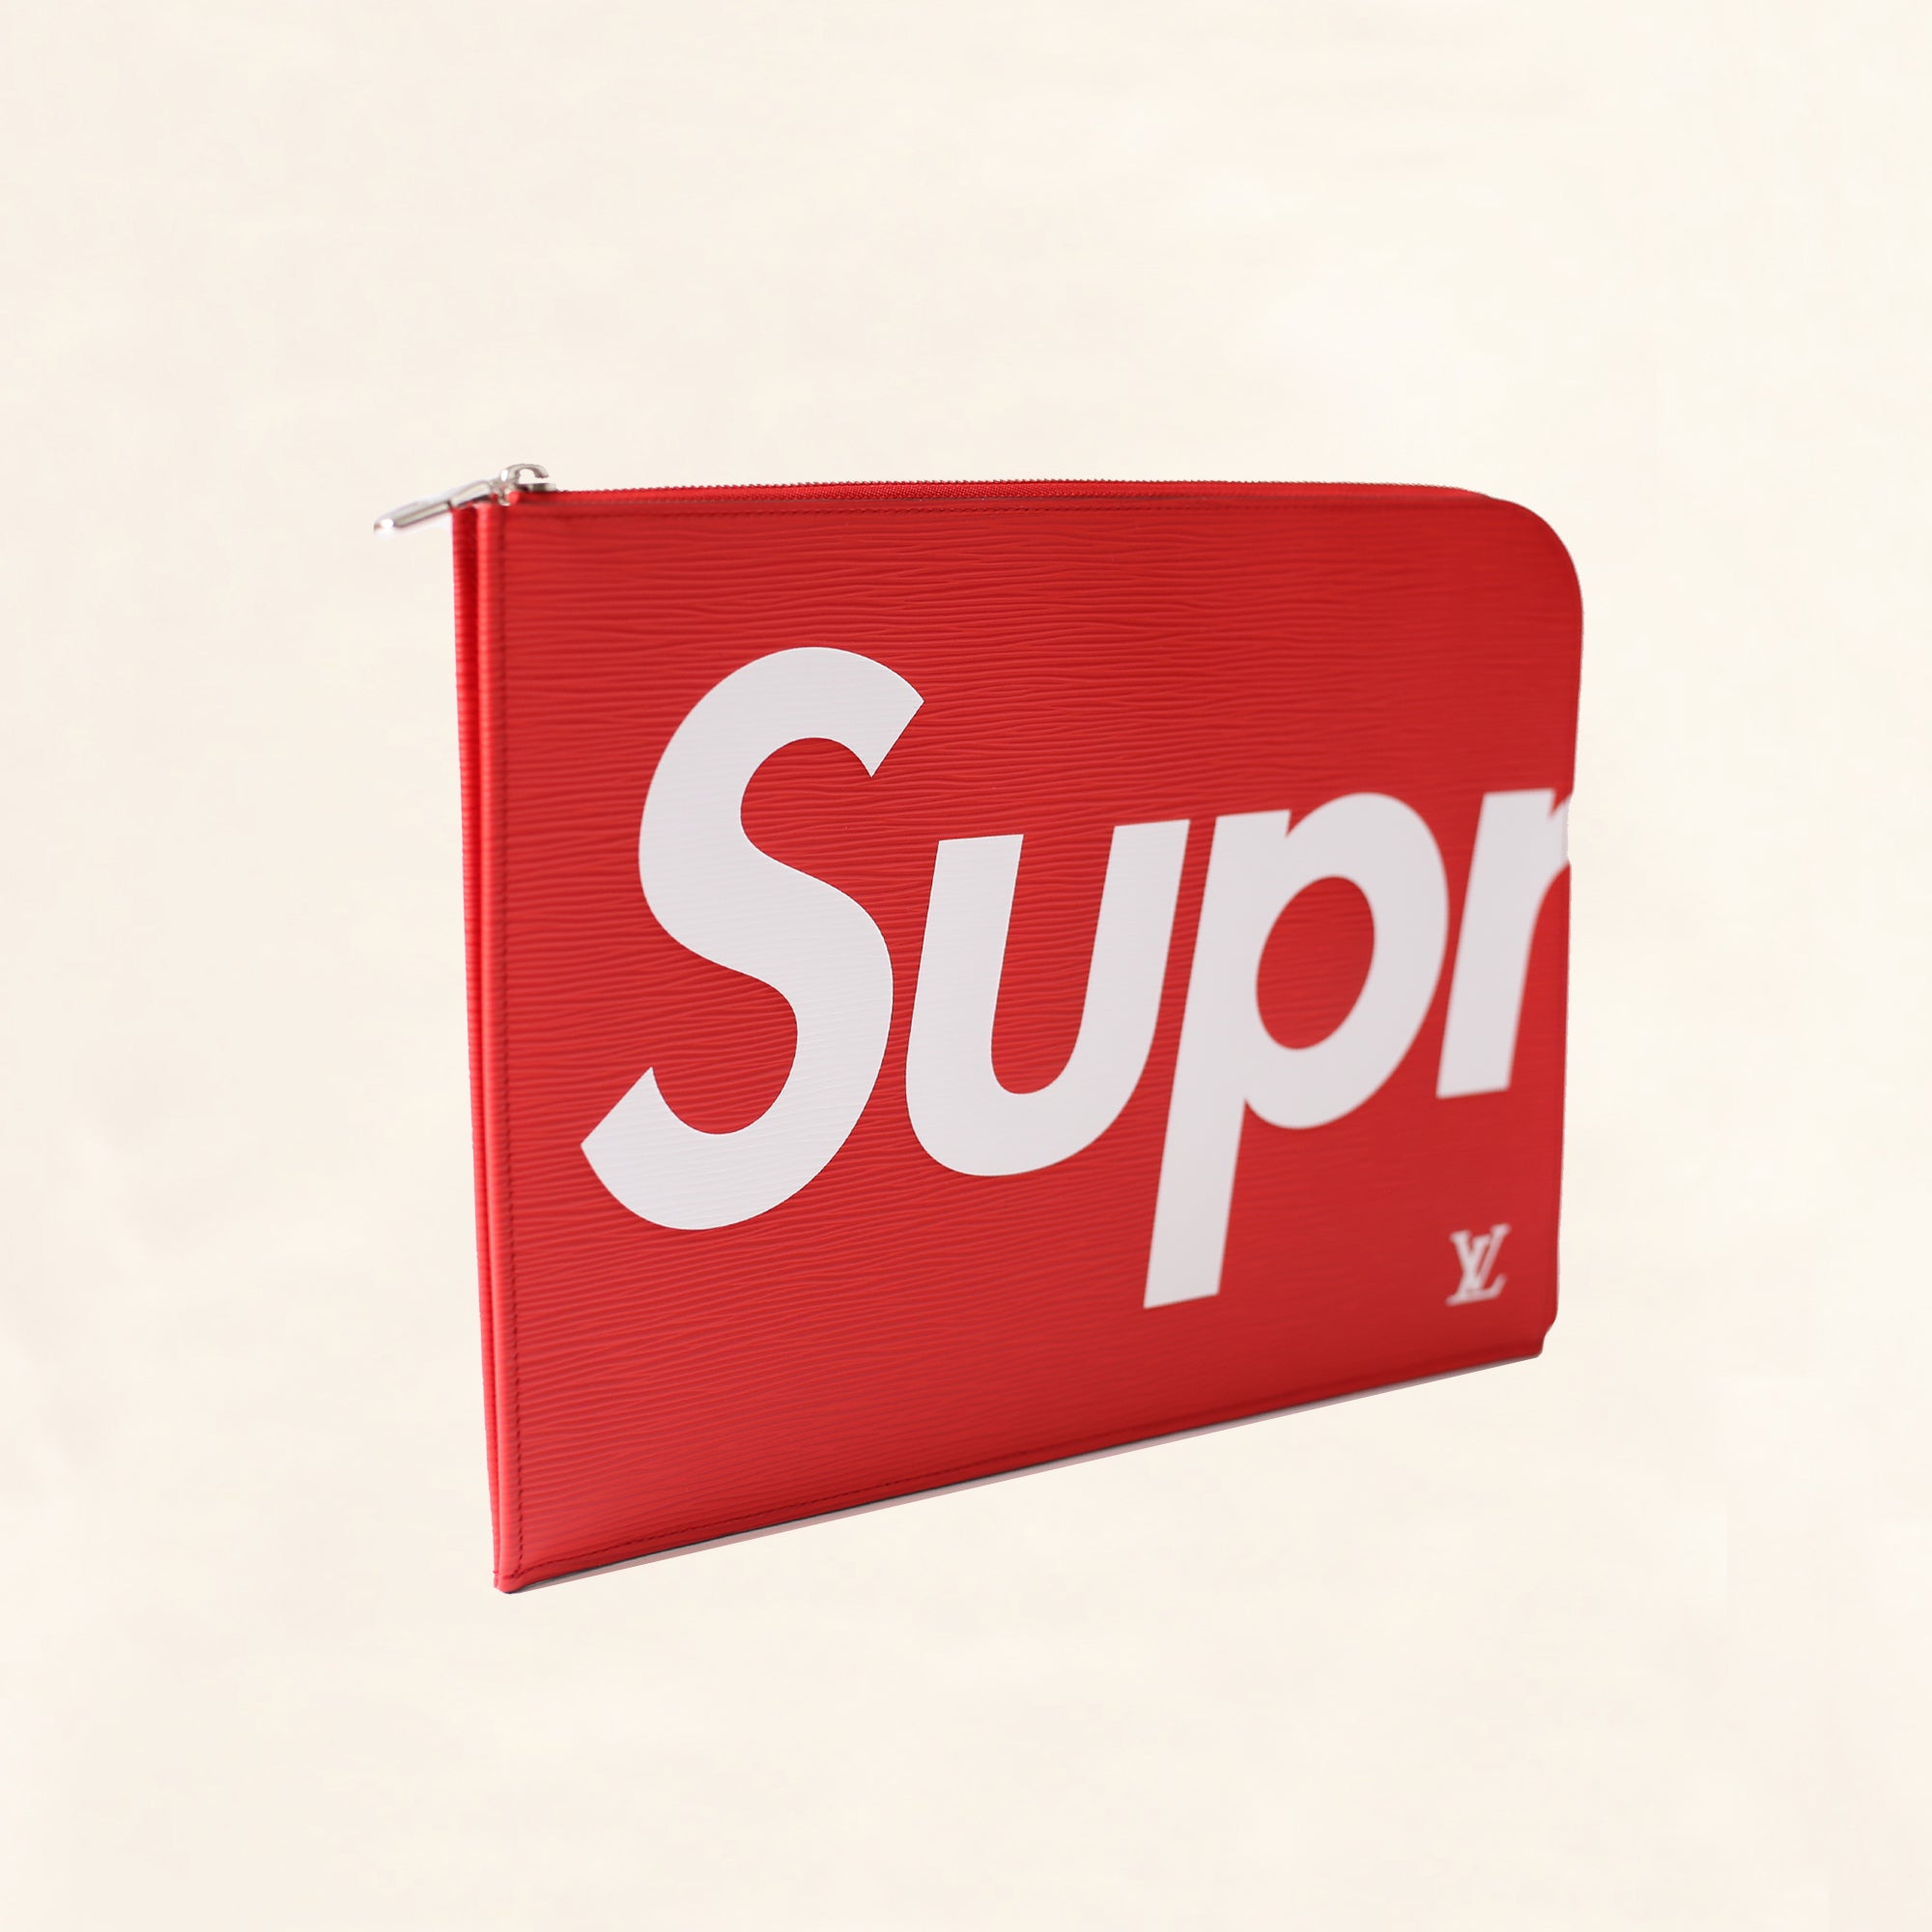 Louis Vuitton | Supreme Logo Box Hoodie Monogram | Red by The-Collectory